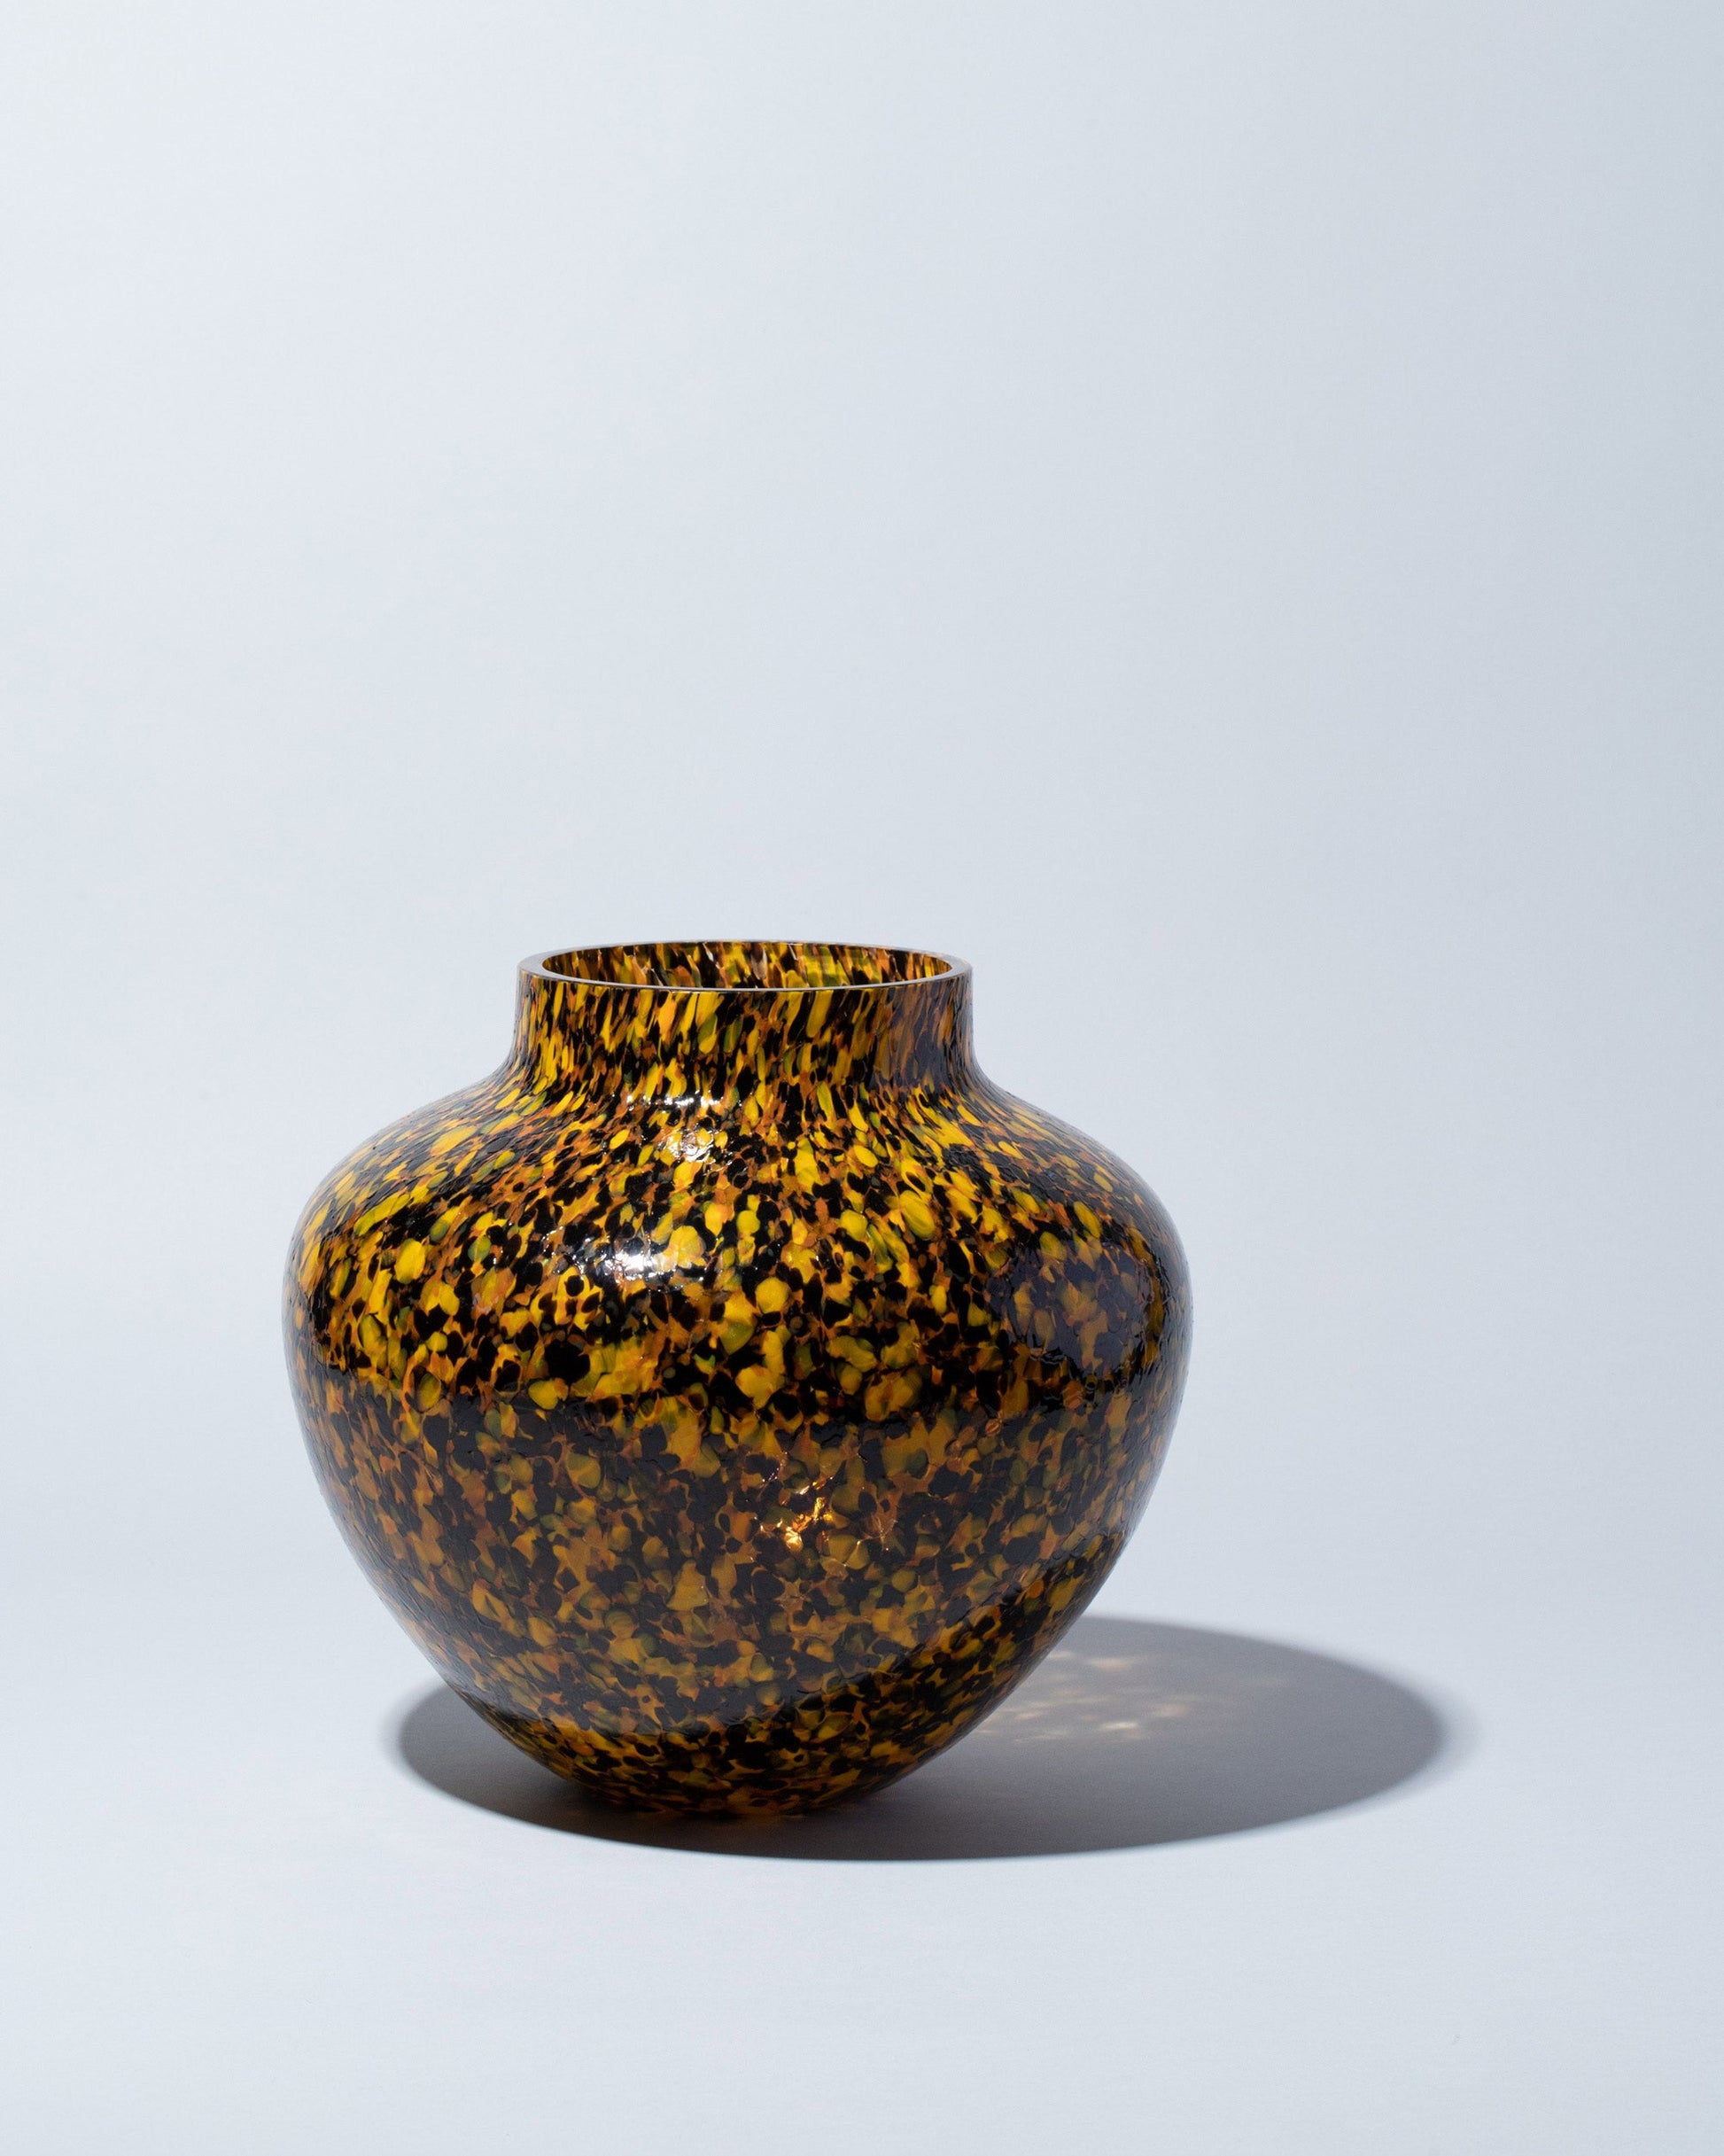  Stories of Italy Leopardo Olla Vase on light color background.